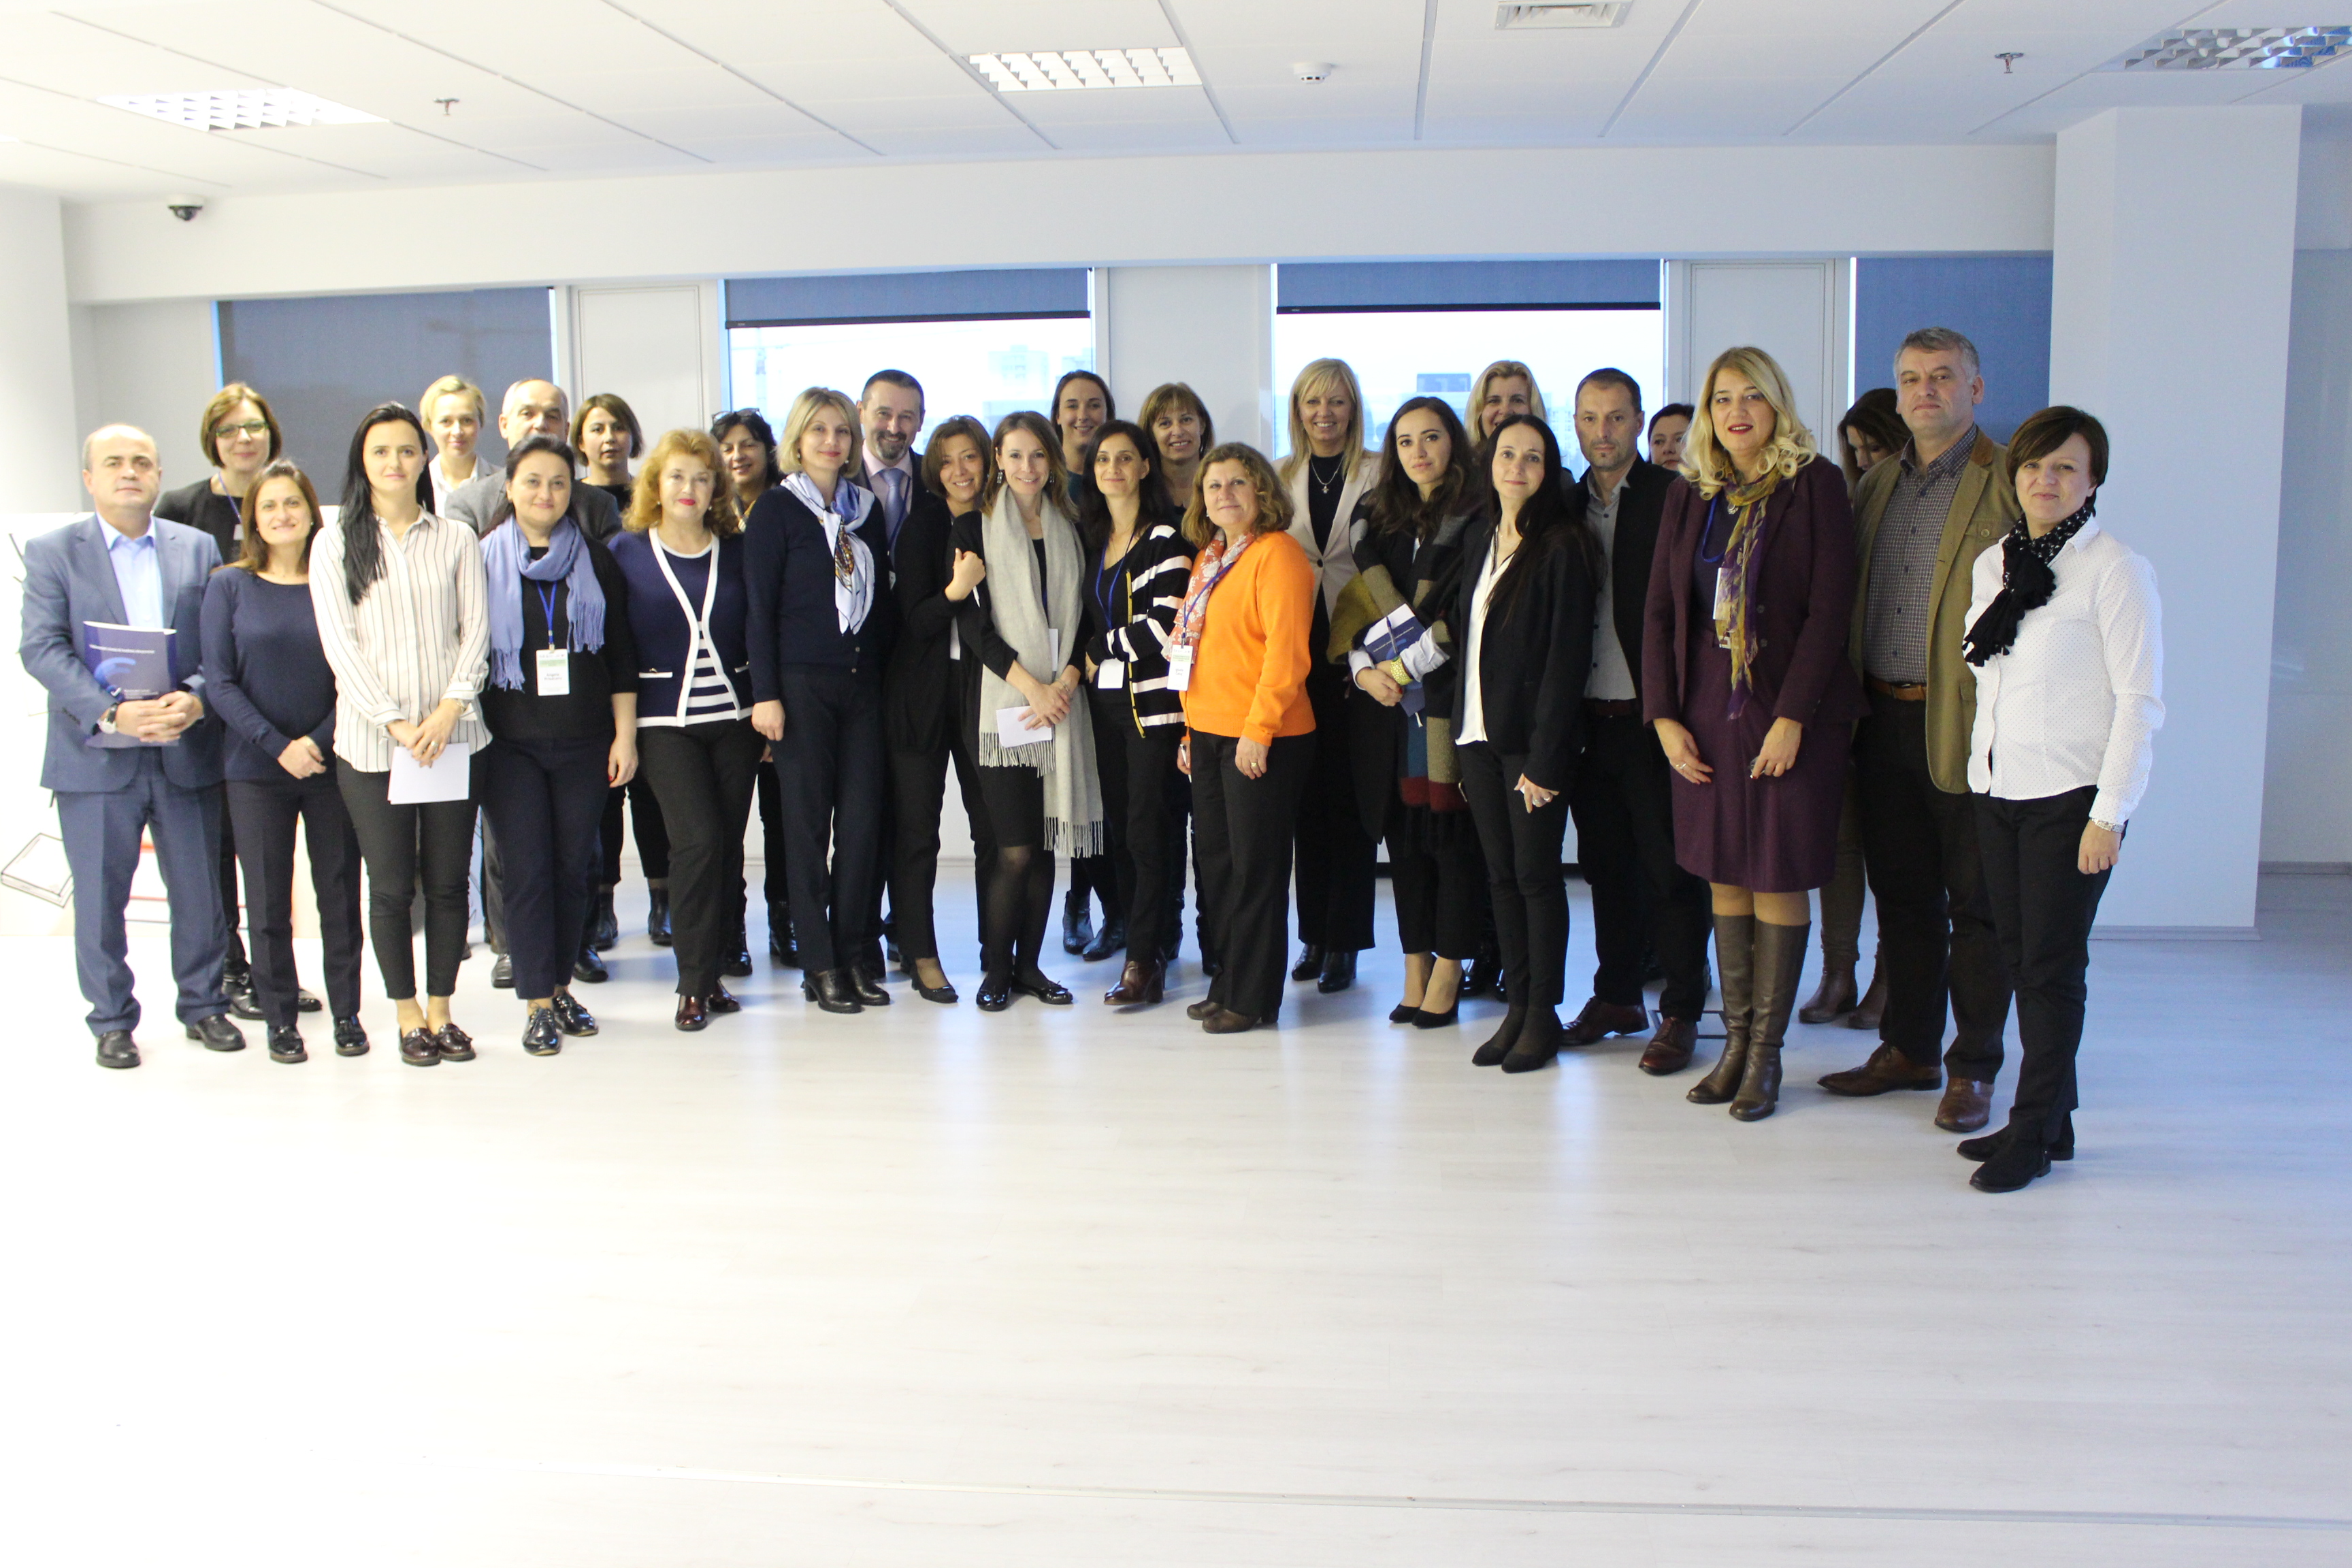 2nd Meeting Of Regional Experts In Quality Assurance In General Education, 8th November 2017, Zagreb